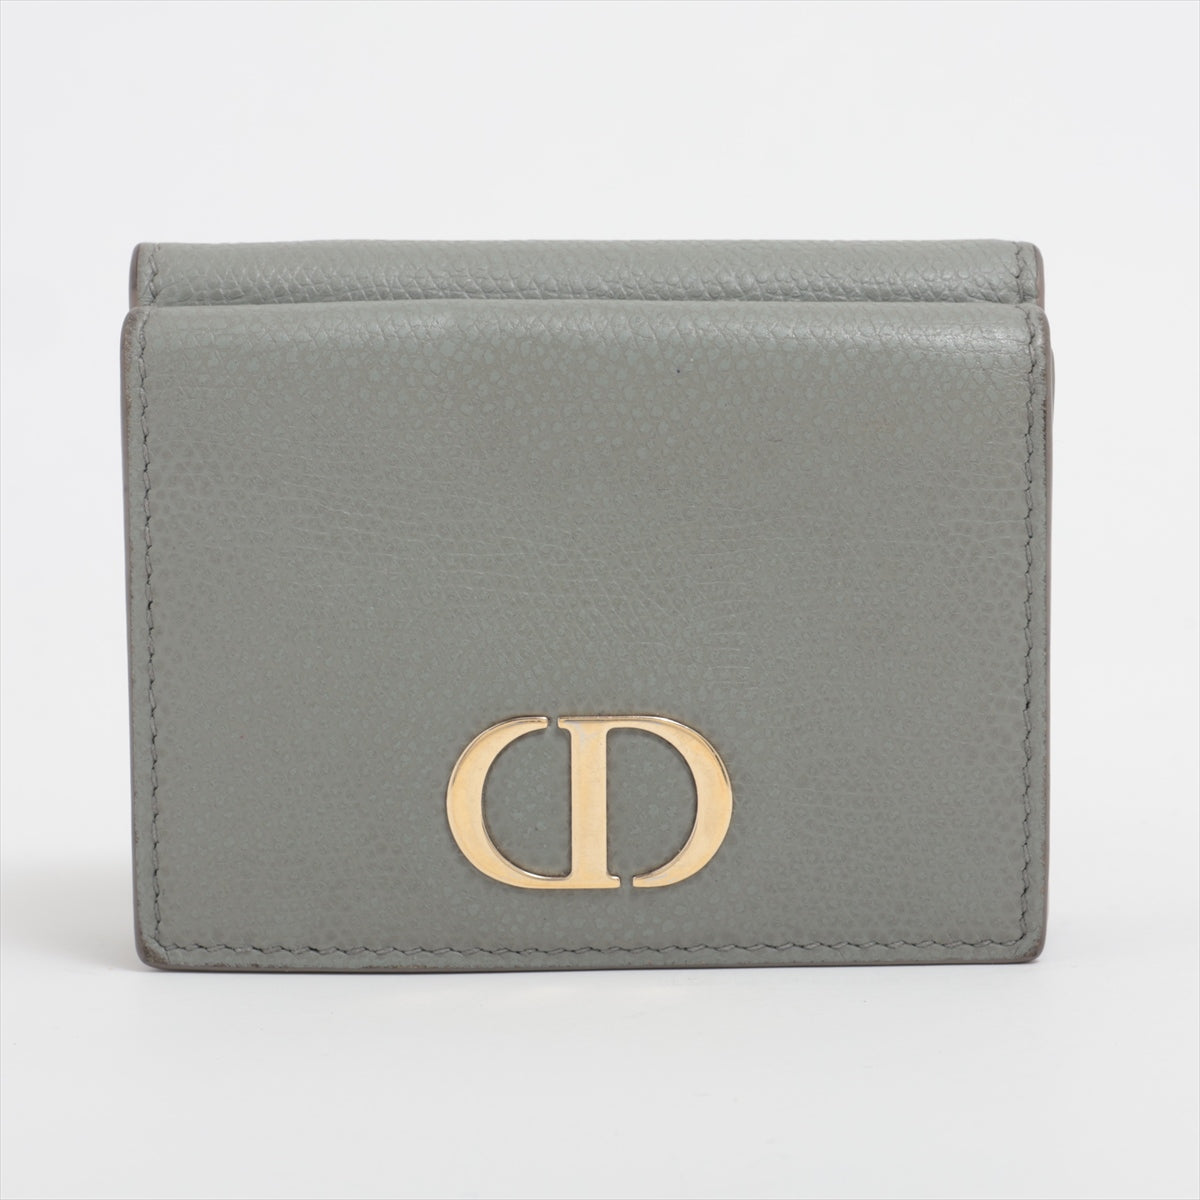 Dior Monterey Leather Compact Wallet Gr ay